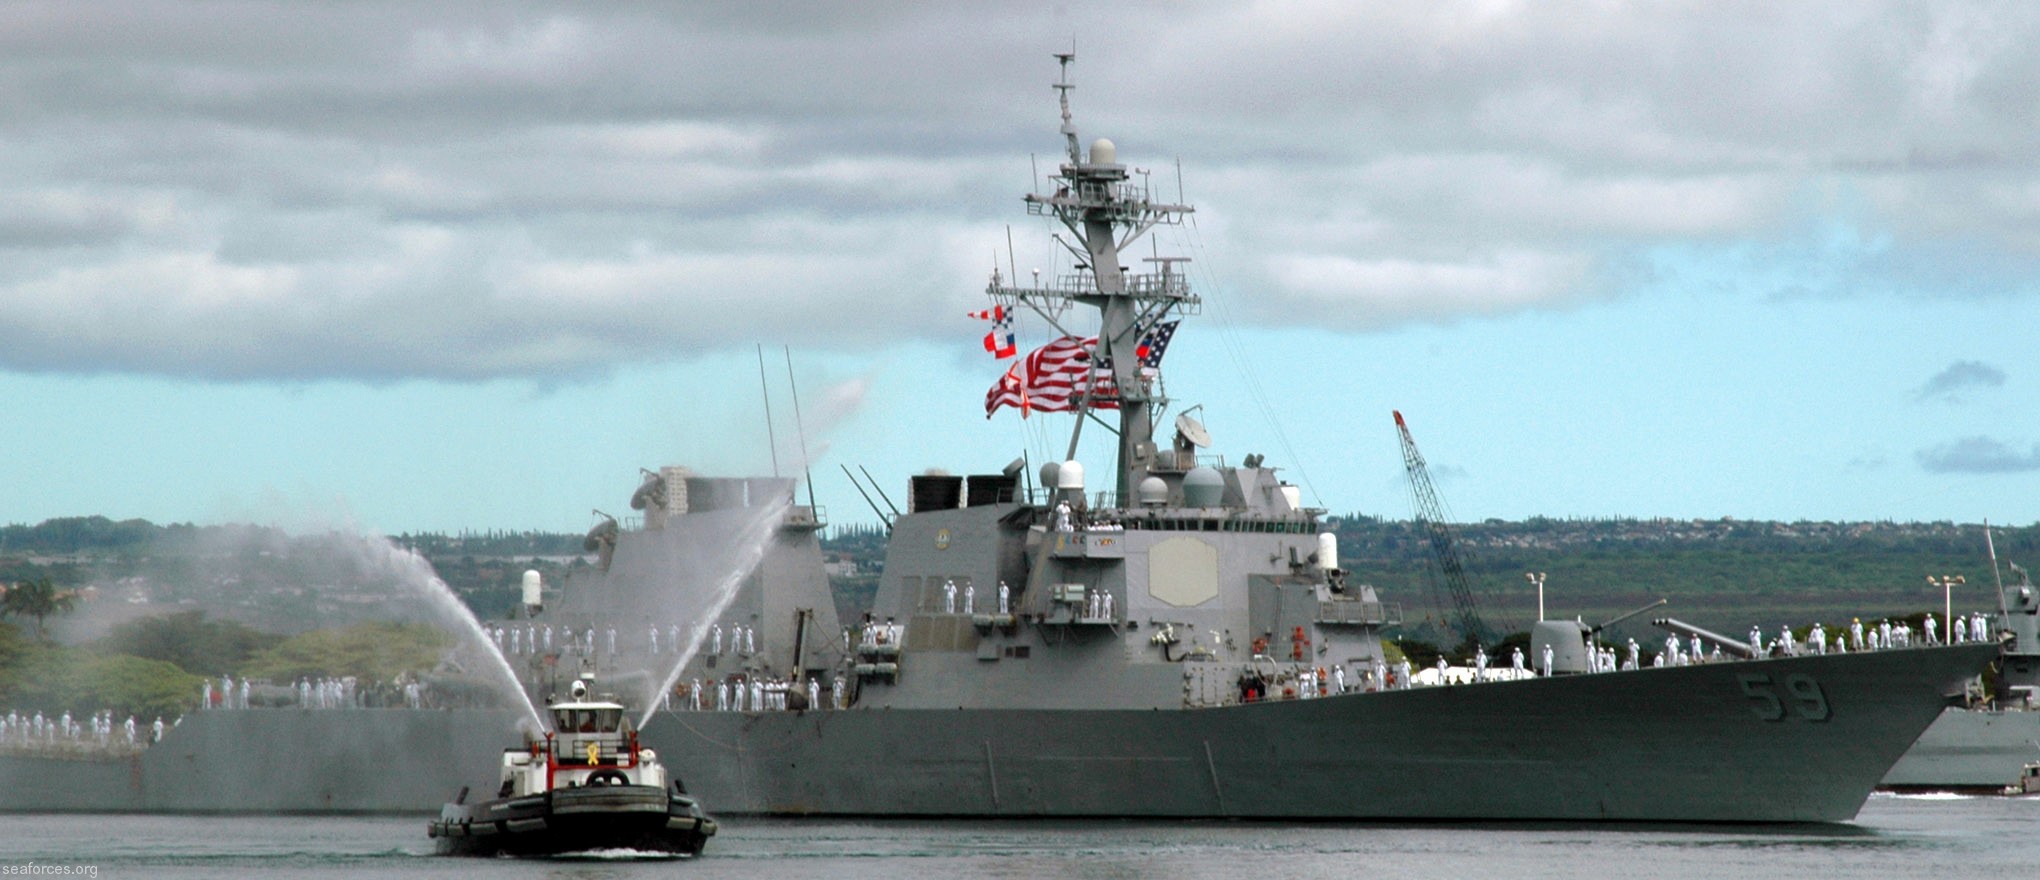 ddg-59 uss russell guided missile destroyer us navy 37